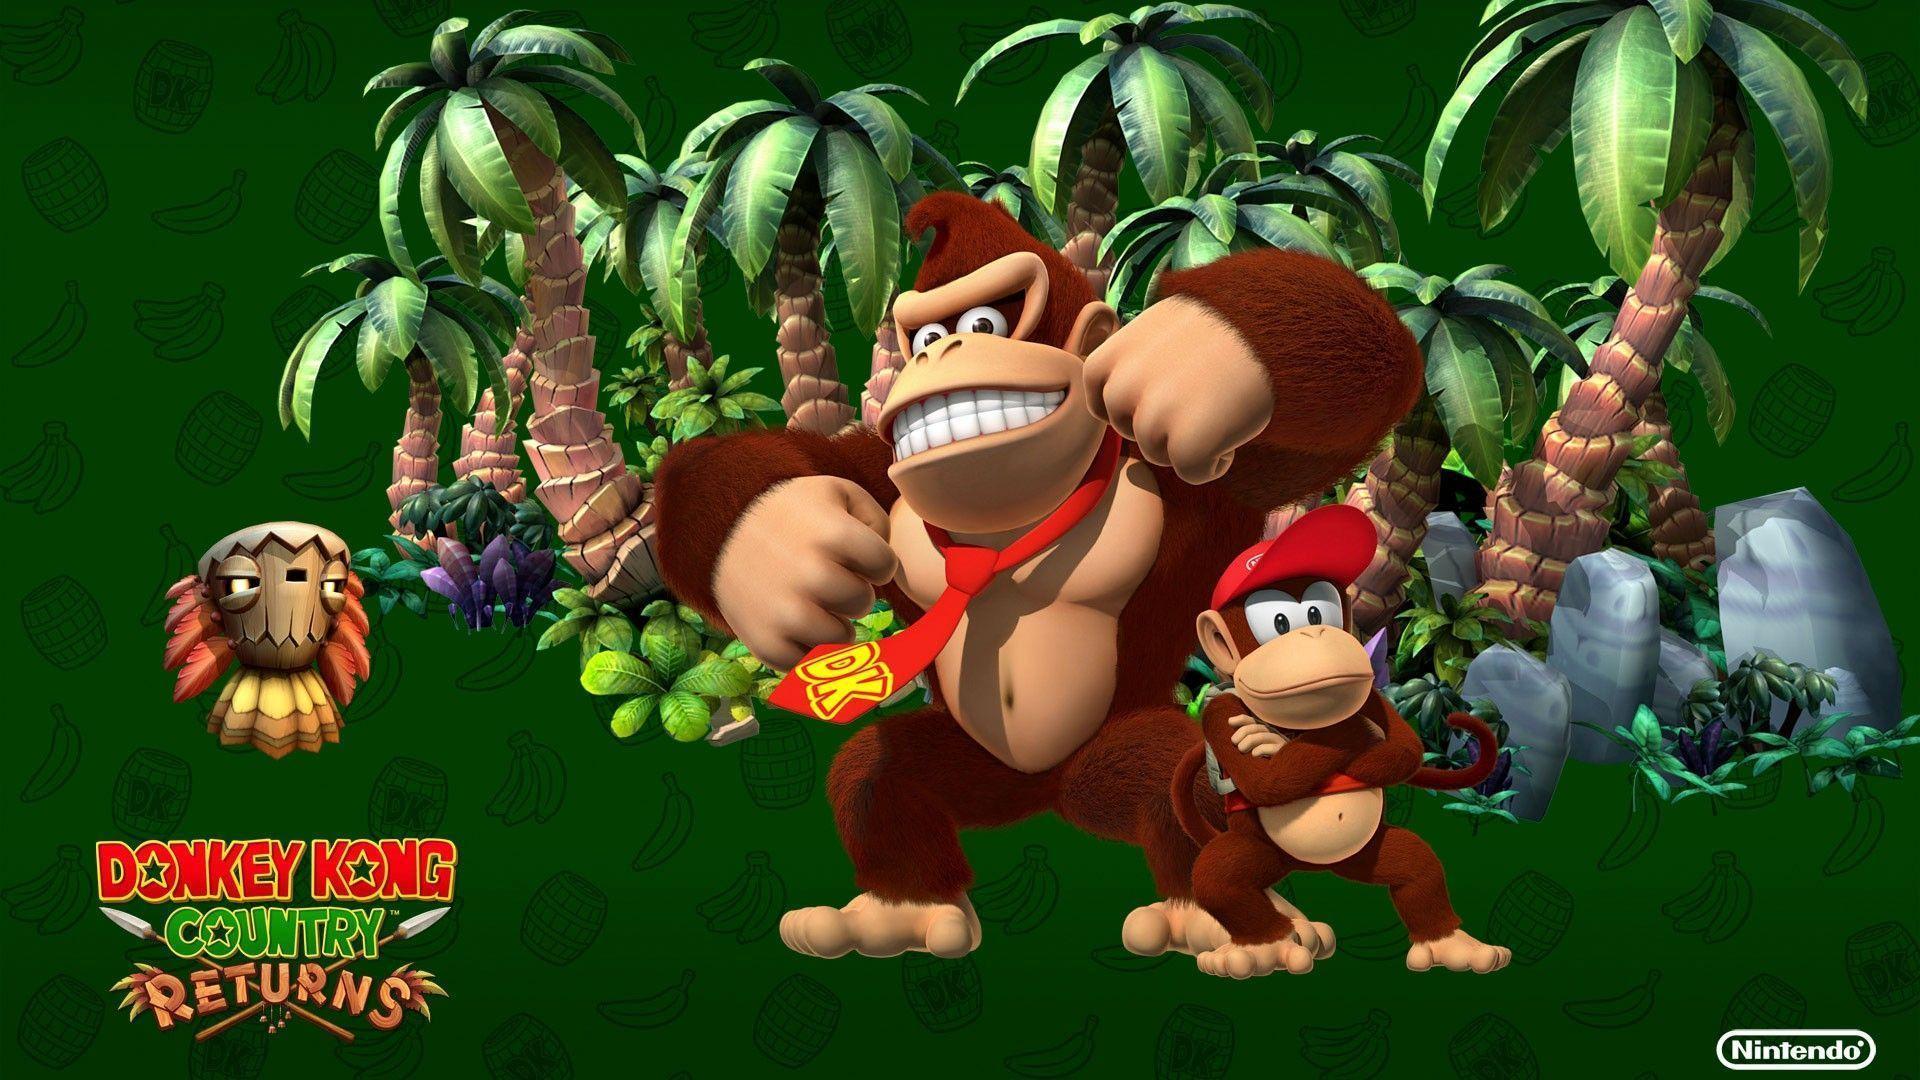 VERSY on Twitter I made a set of 16 Donkey Kong Country wallpapers from  the highest res promotional art I could find Enjoy  httpstcos43Kt25CV9 httpstcoof5YD1re6n  Twitter